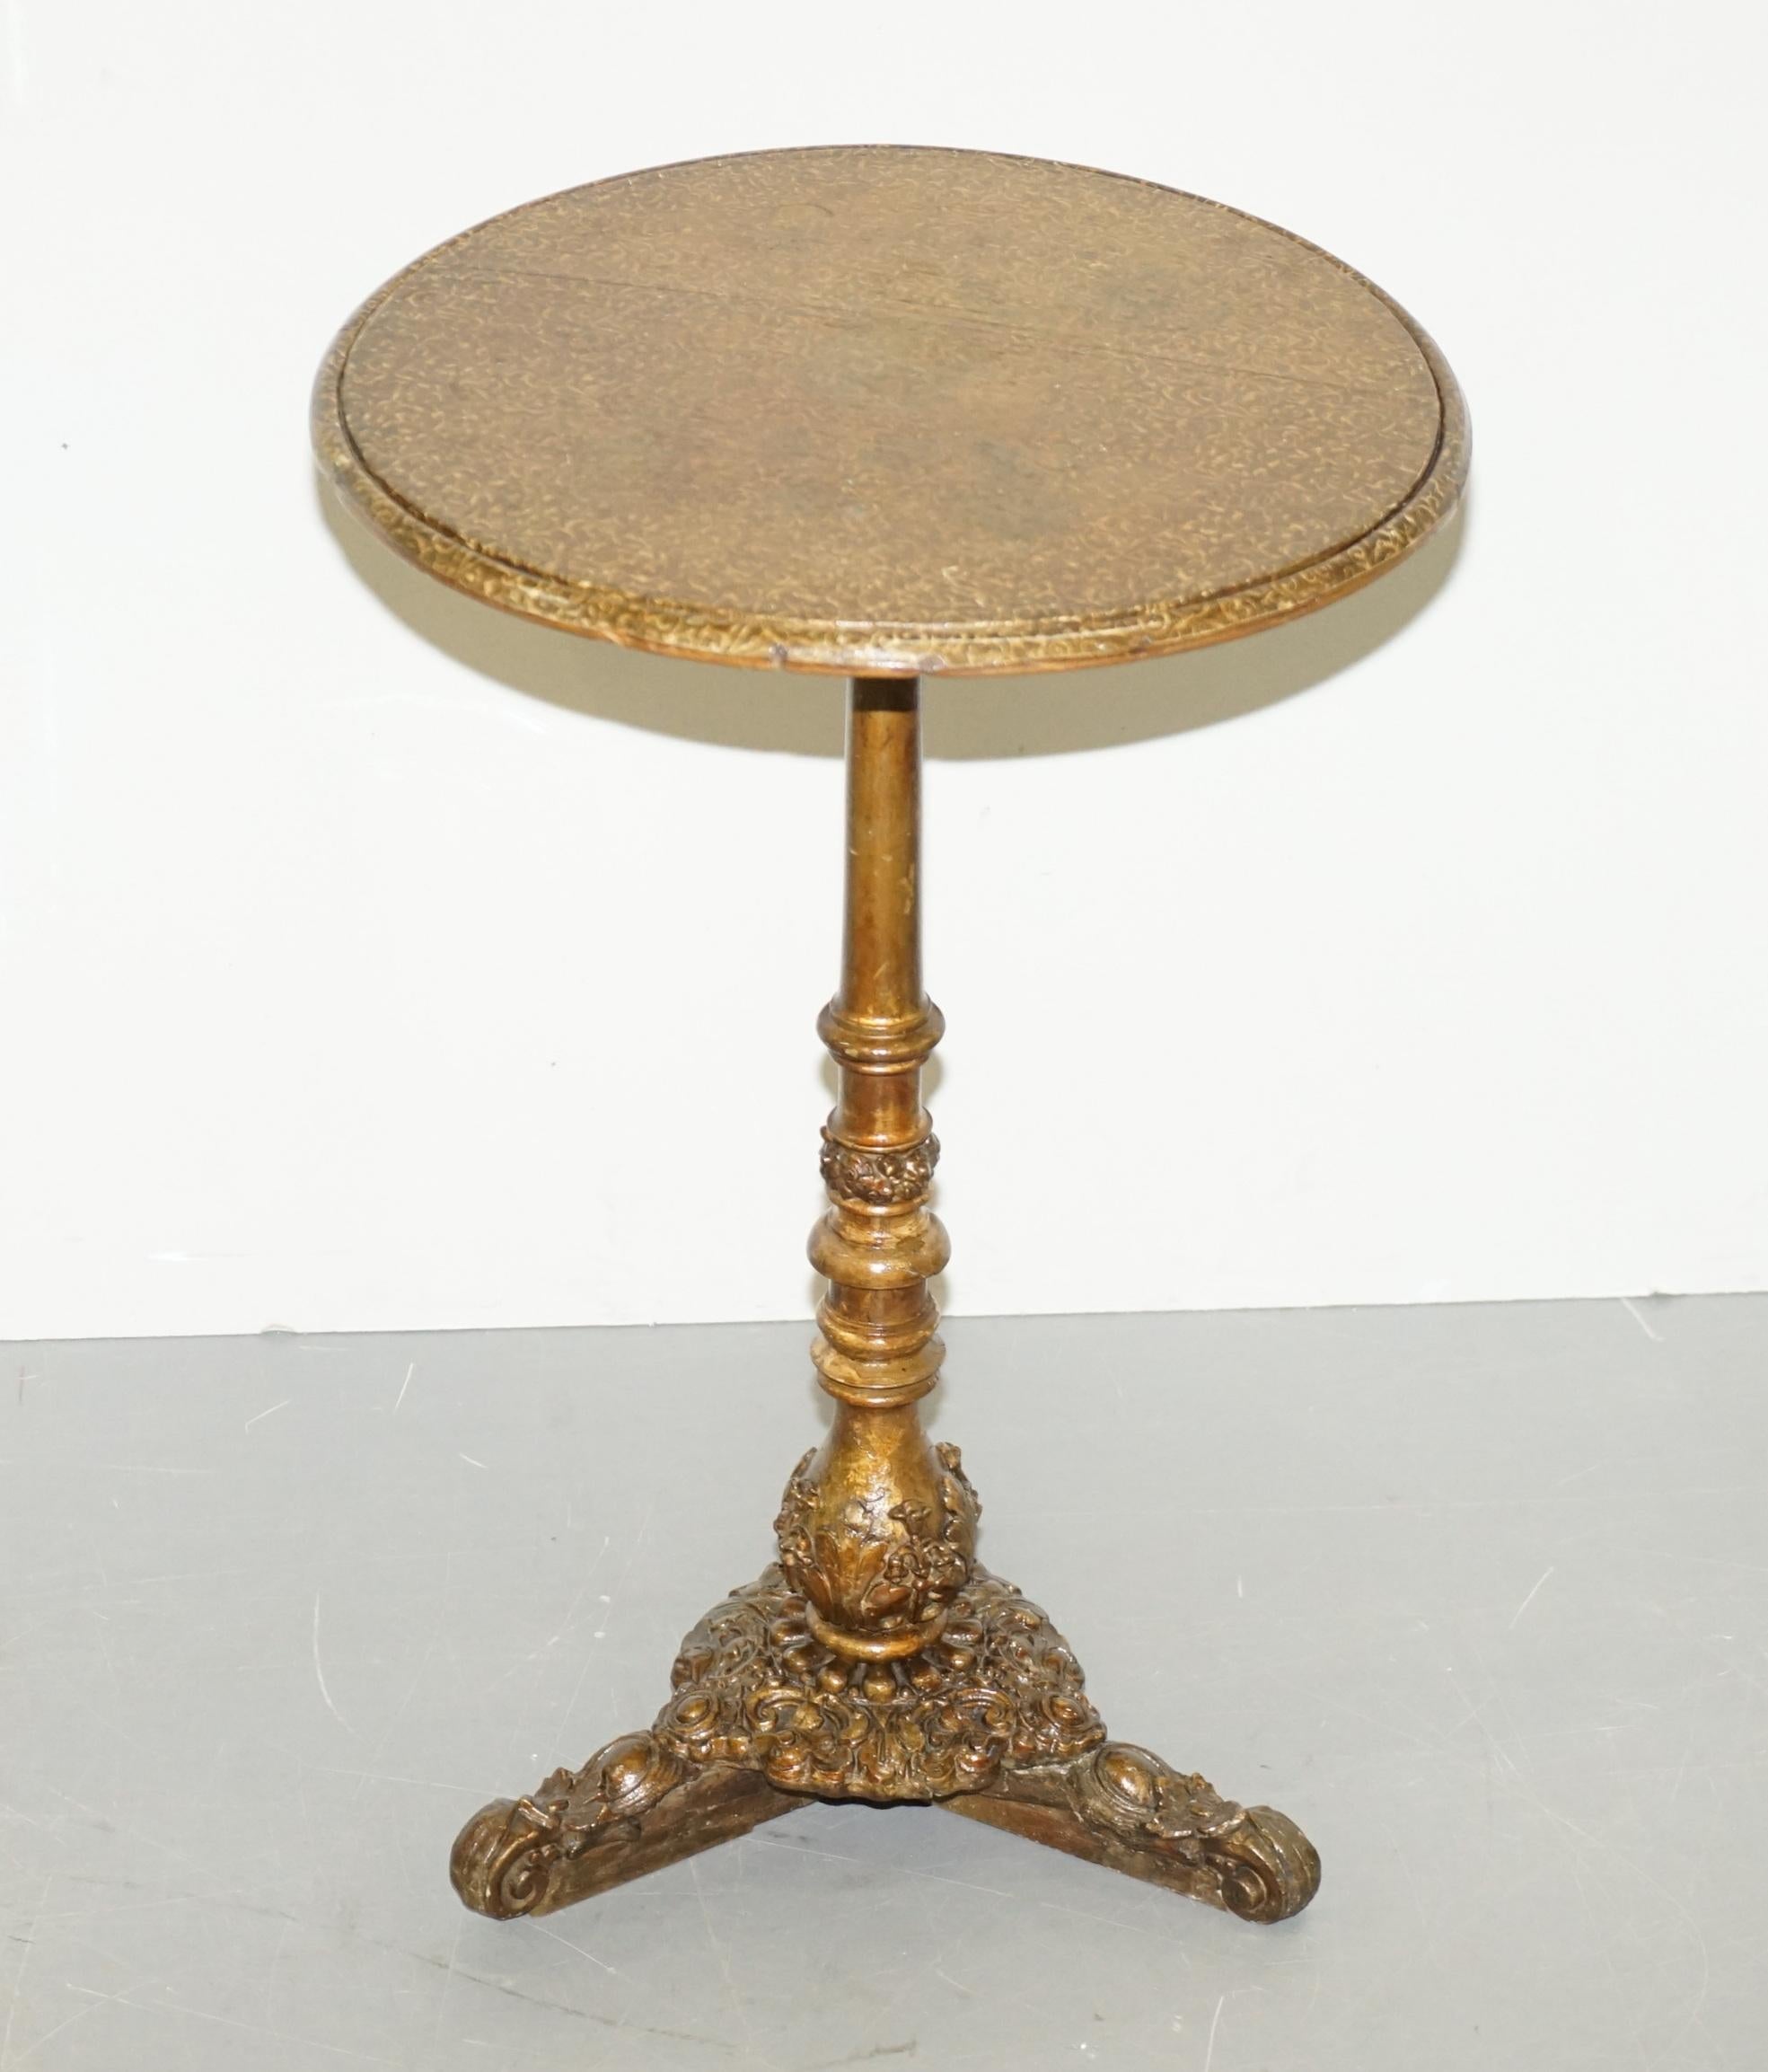 We are delighted to offer for sale this absolutely stunning Regency circa 1810 Polychrome painted Italian hand carved tiltop side table

A very good looking well made and decorative piece, the base is hand carved with floral details, it is a real